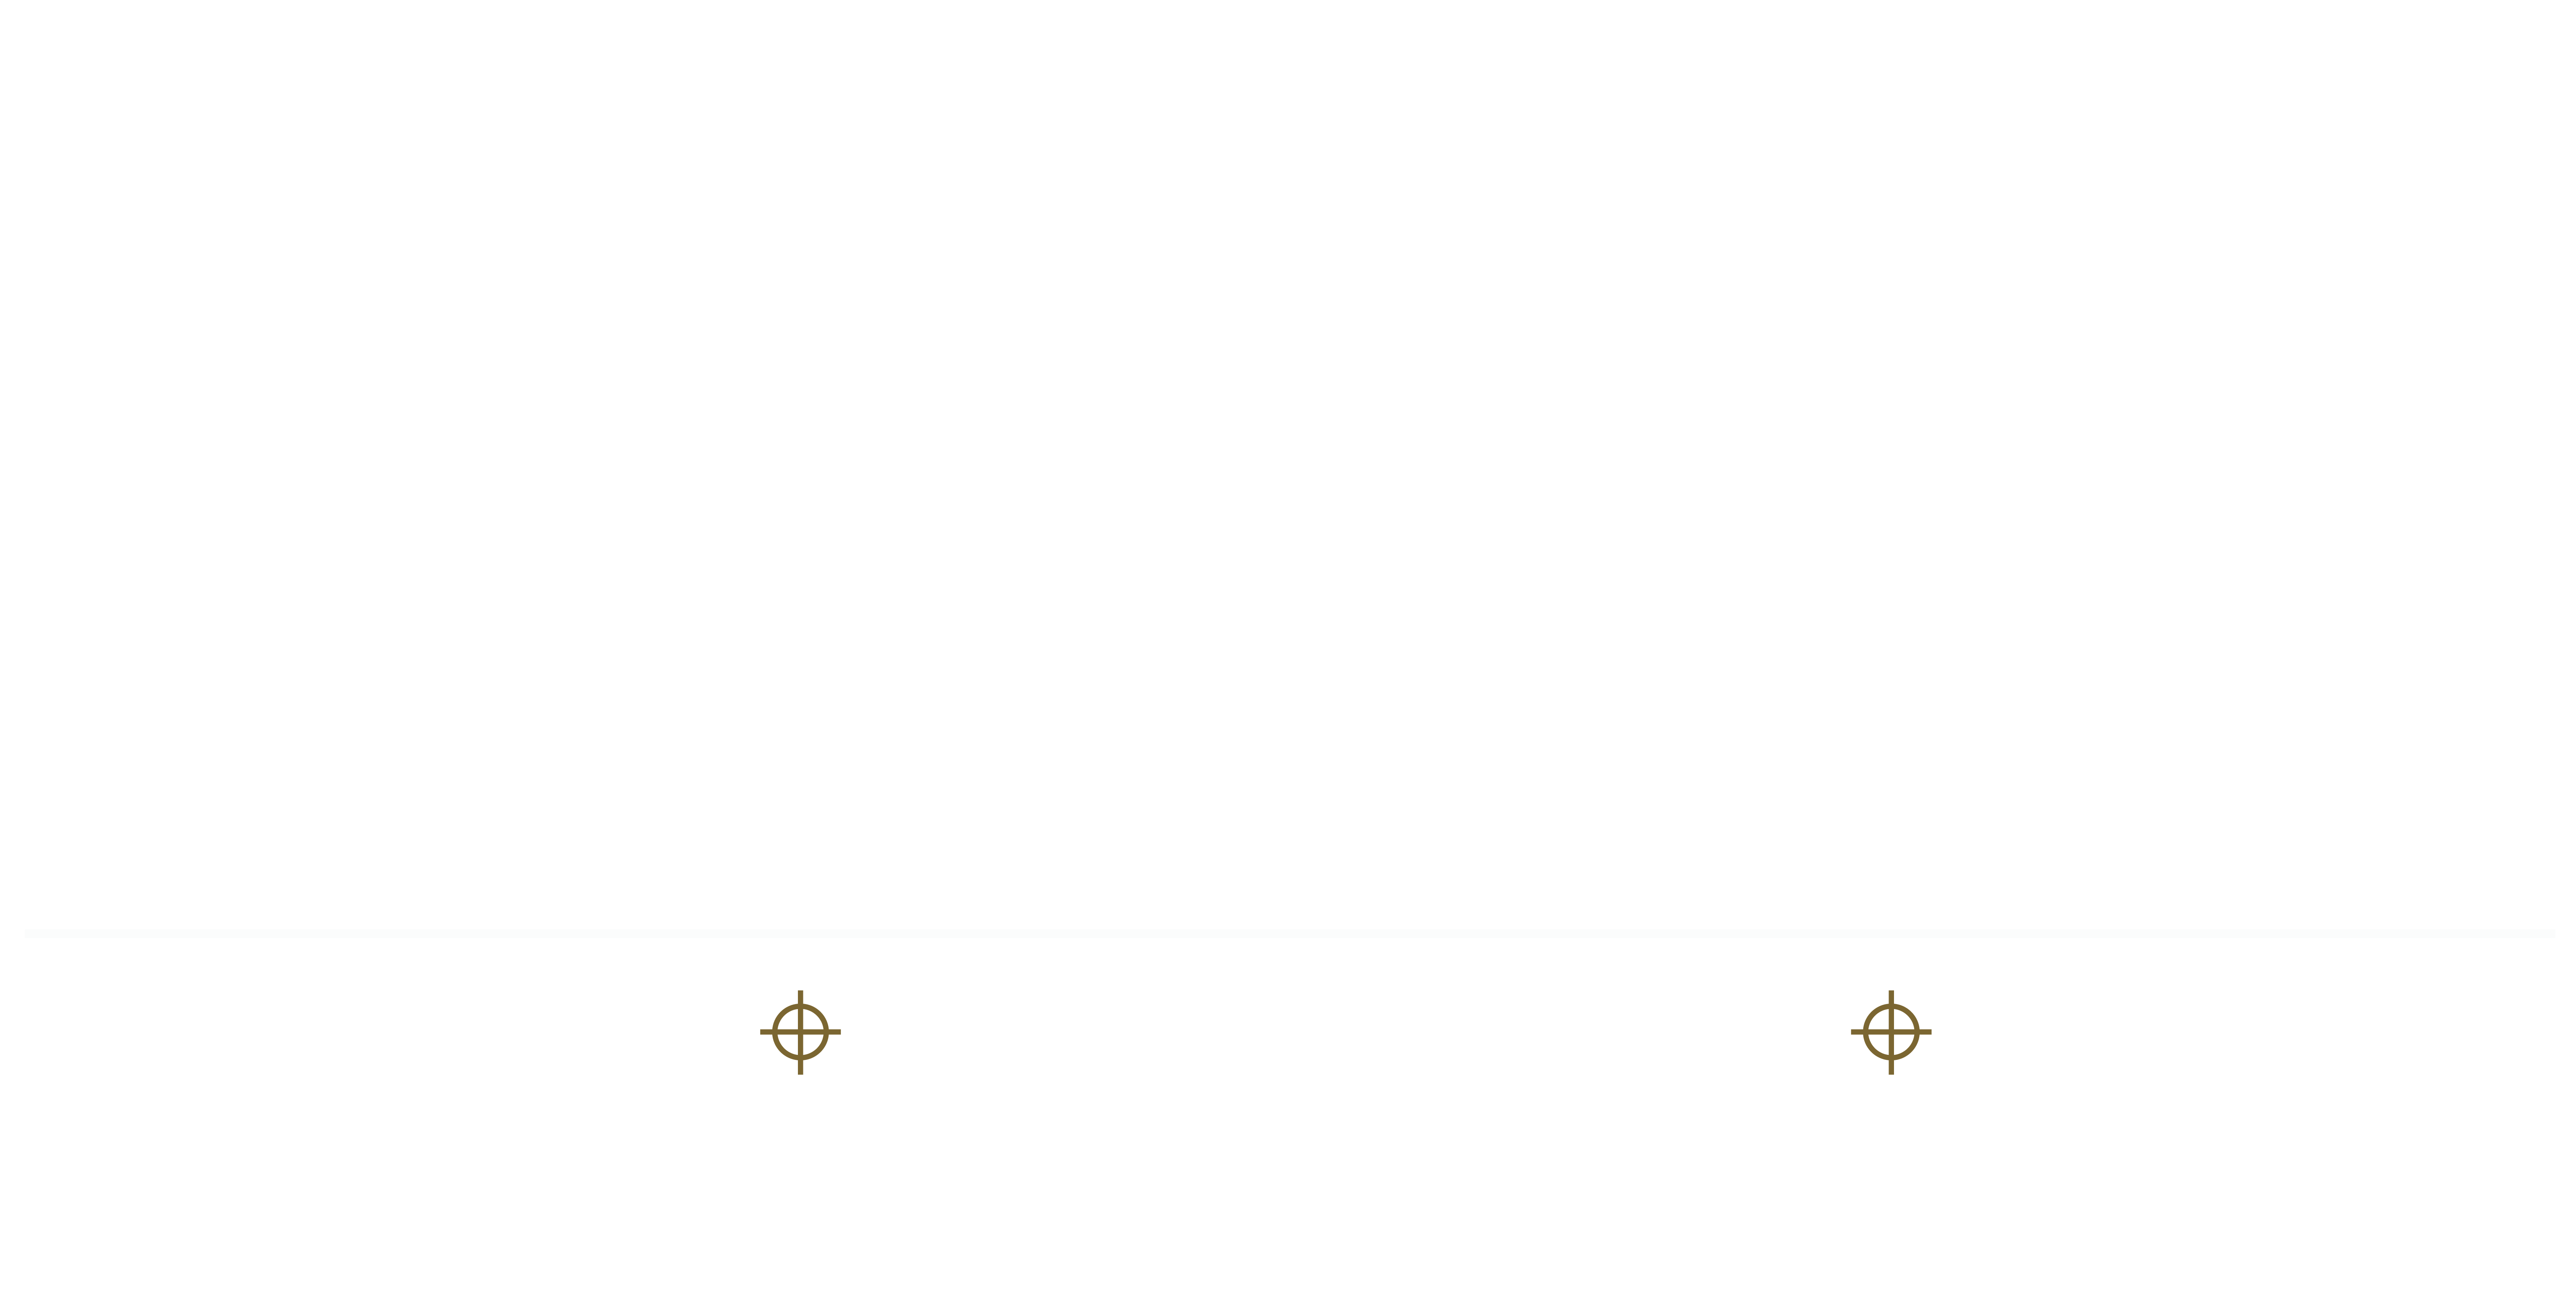 Stag-Arms